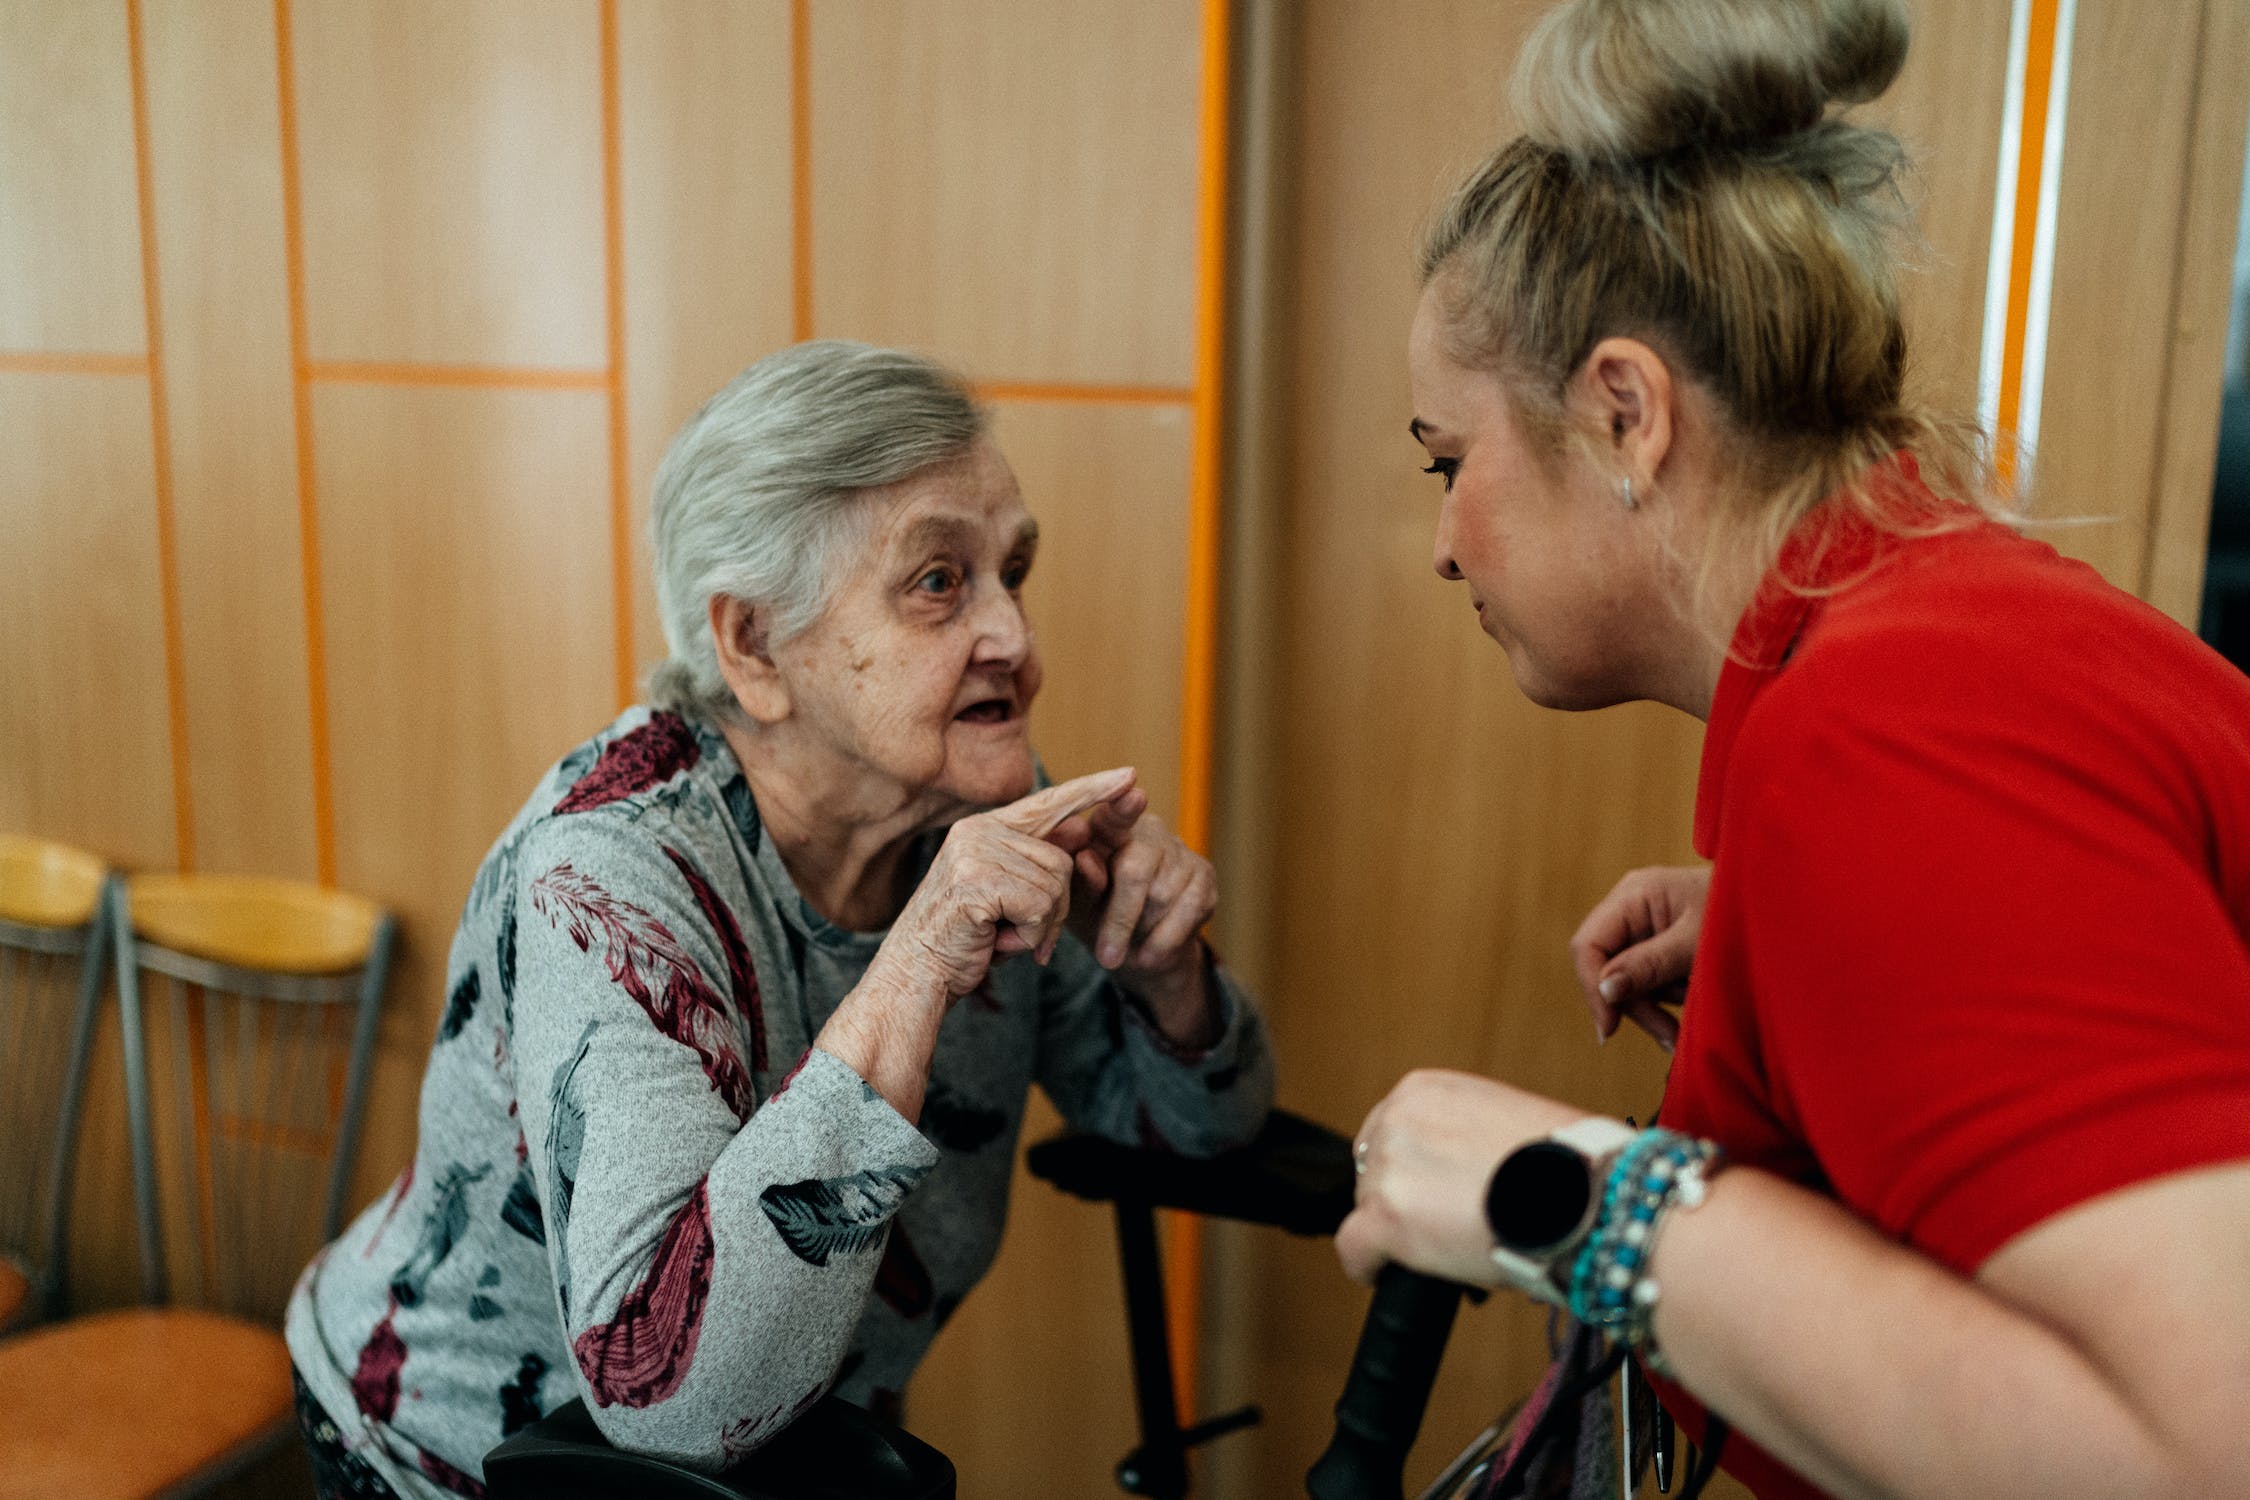 Family Care Homes are small family-style homes that provide assisted living for seniors and the disabled. Here a caregiver and resident enjoy a chat together